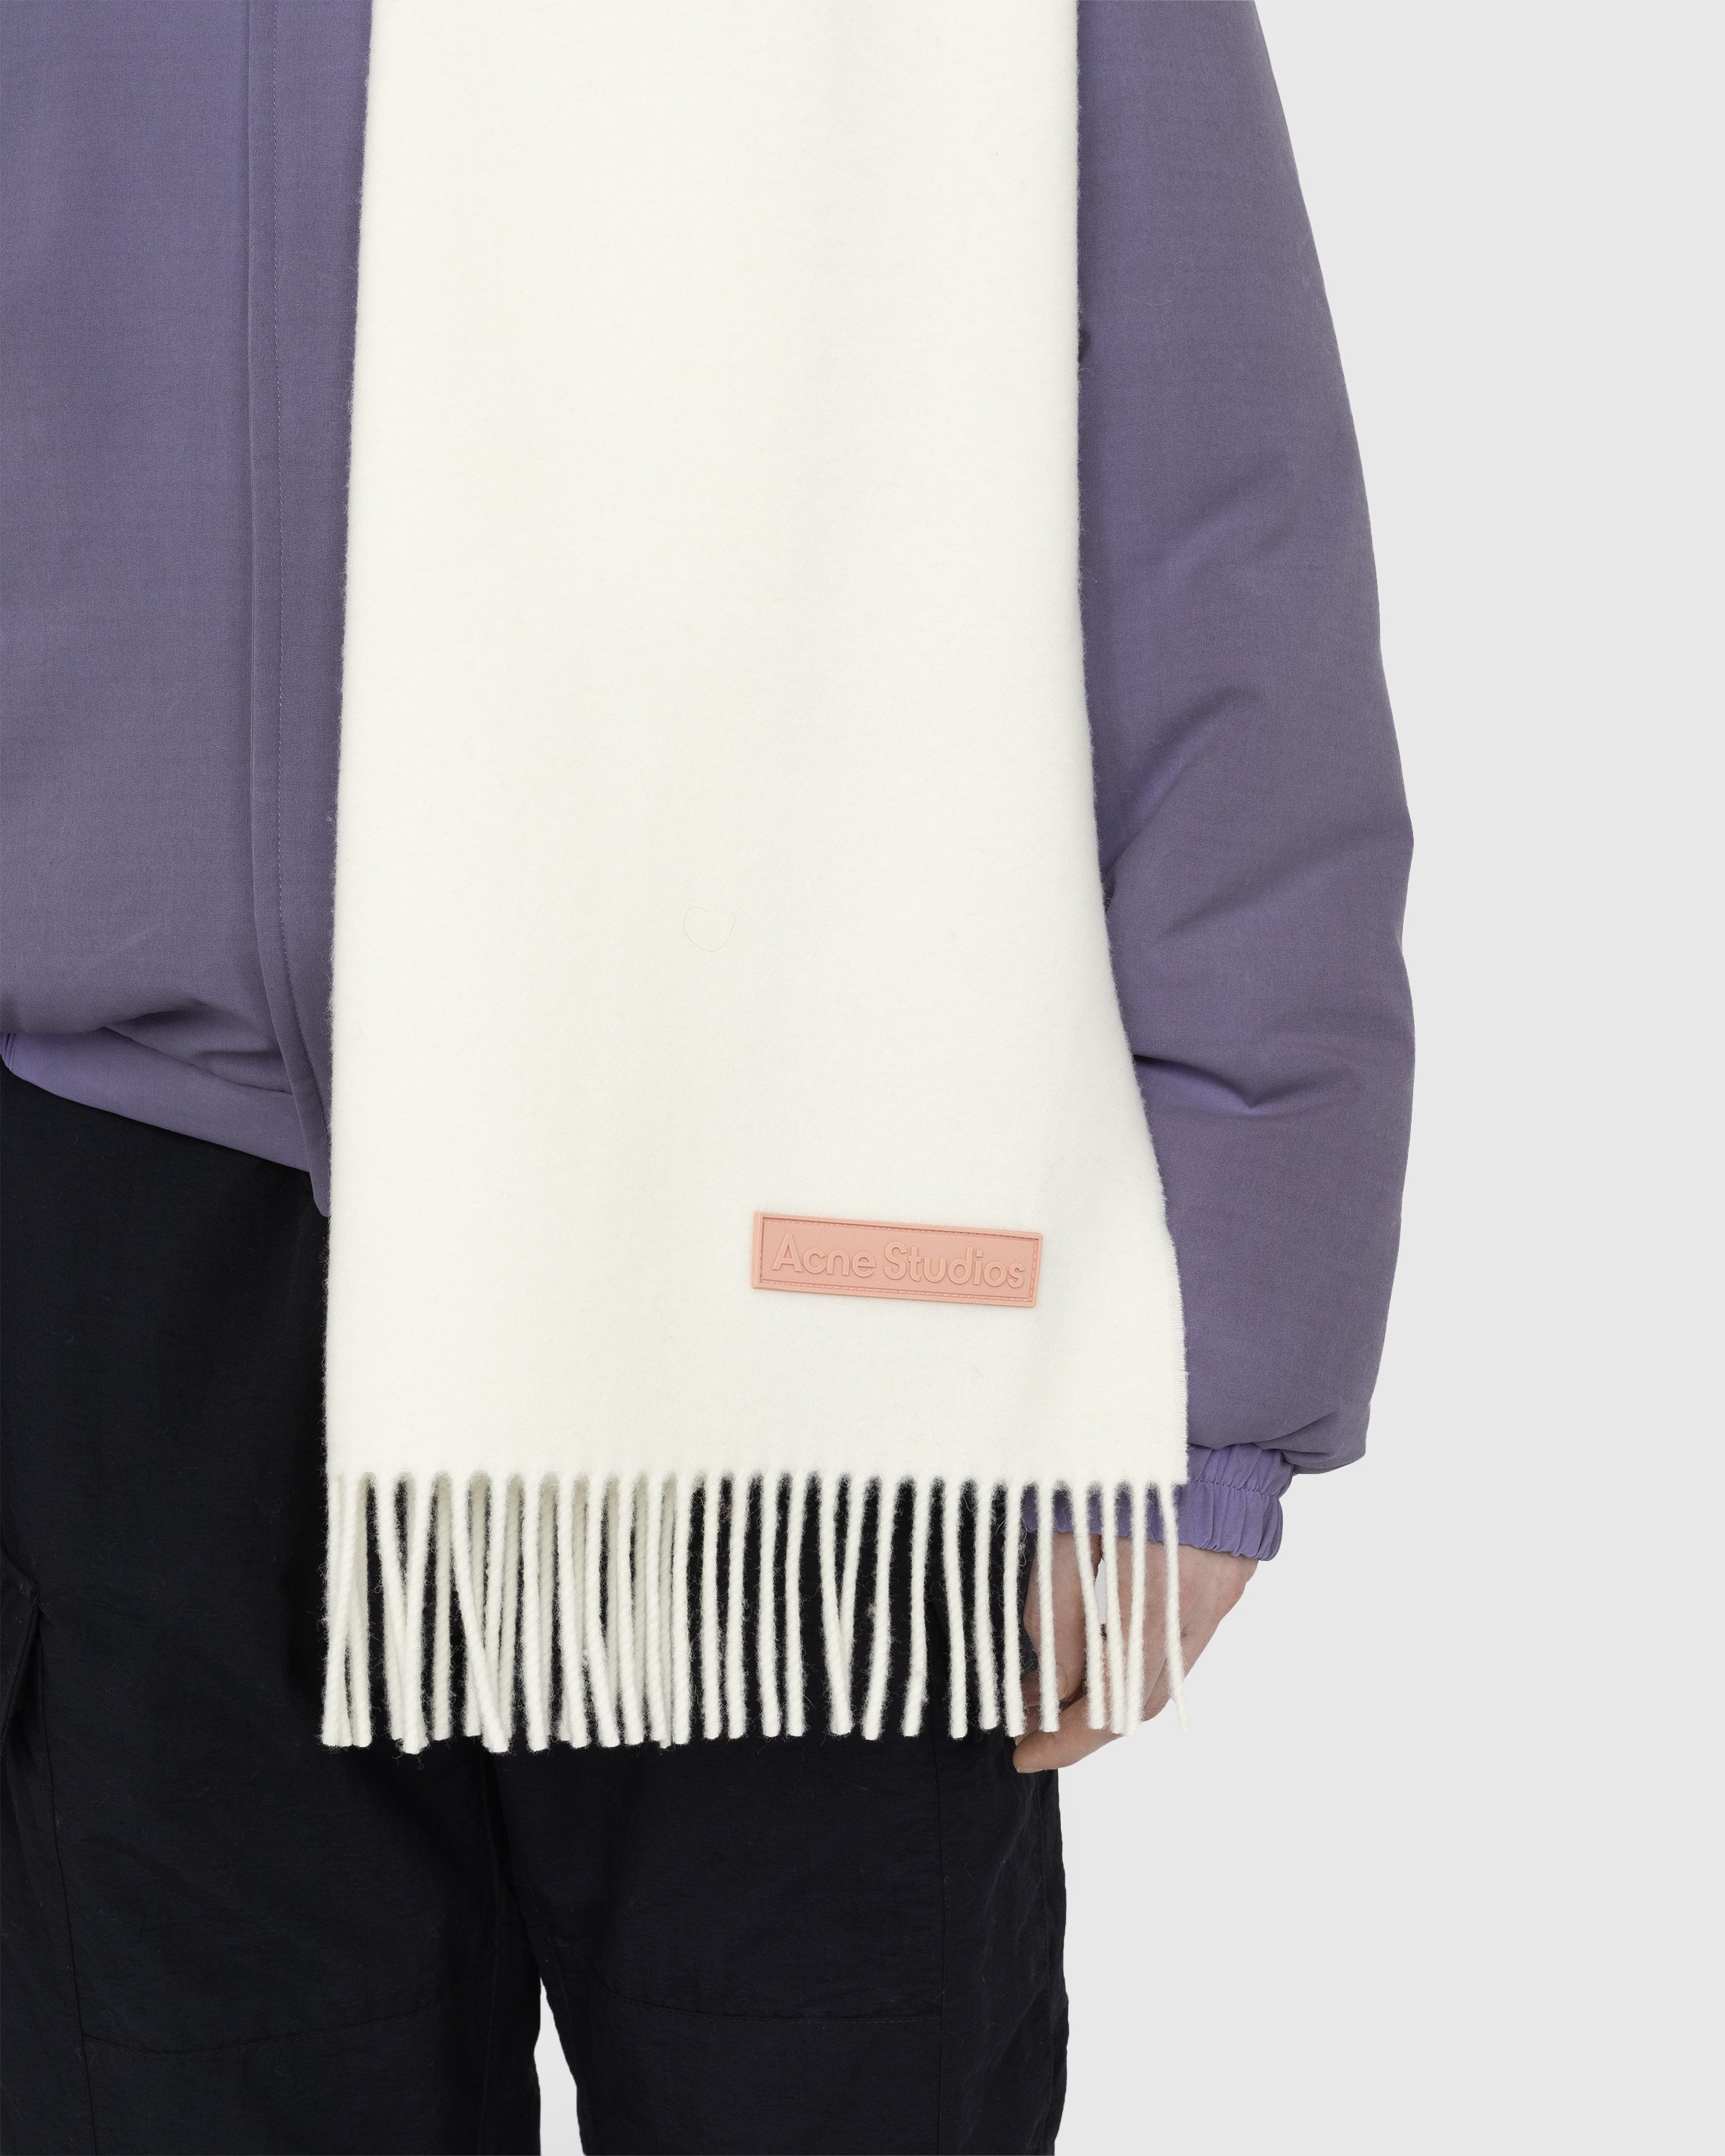 Acne Studios - Rich Wool Fringe Scarf - Accessories - White - Image 4